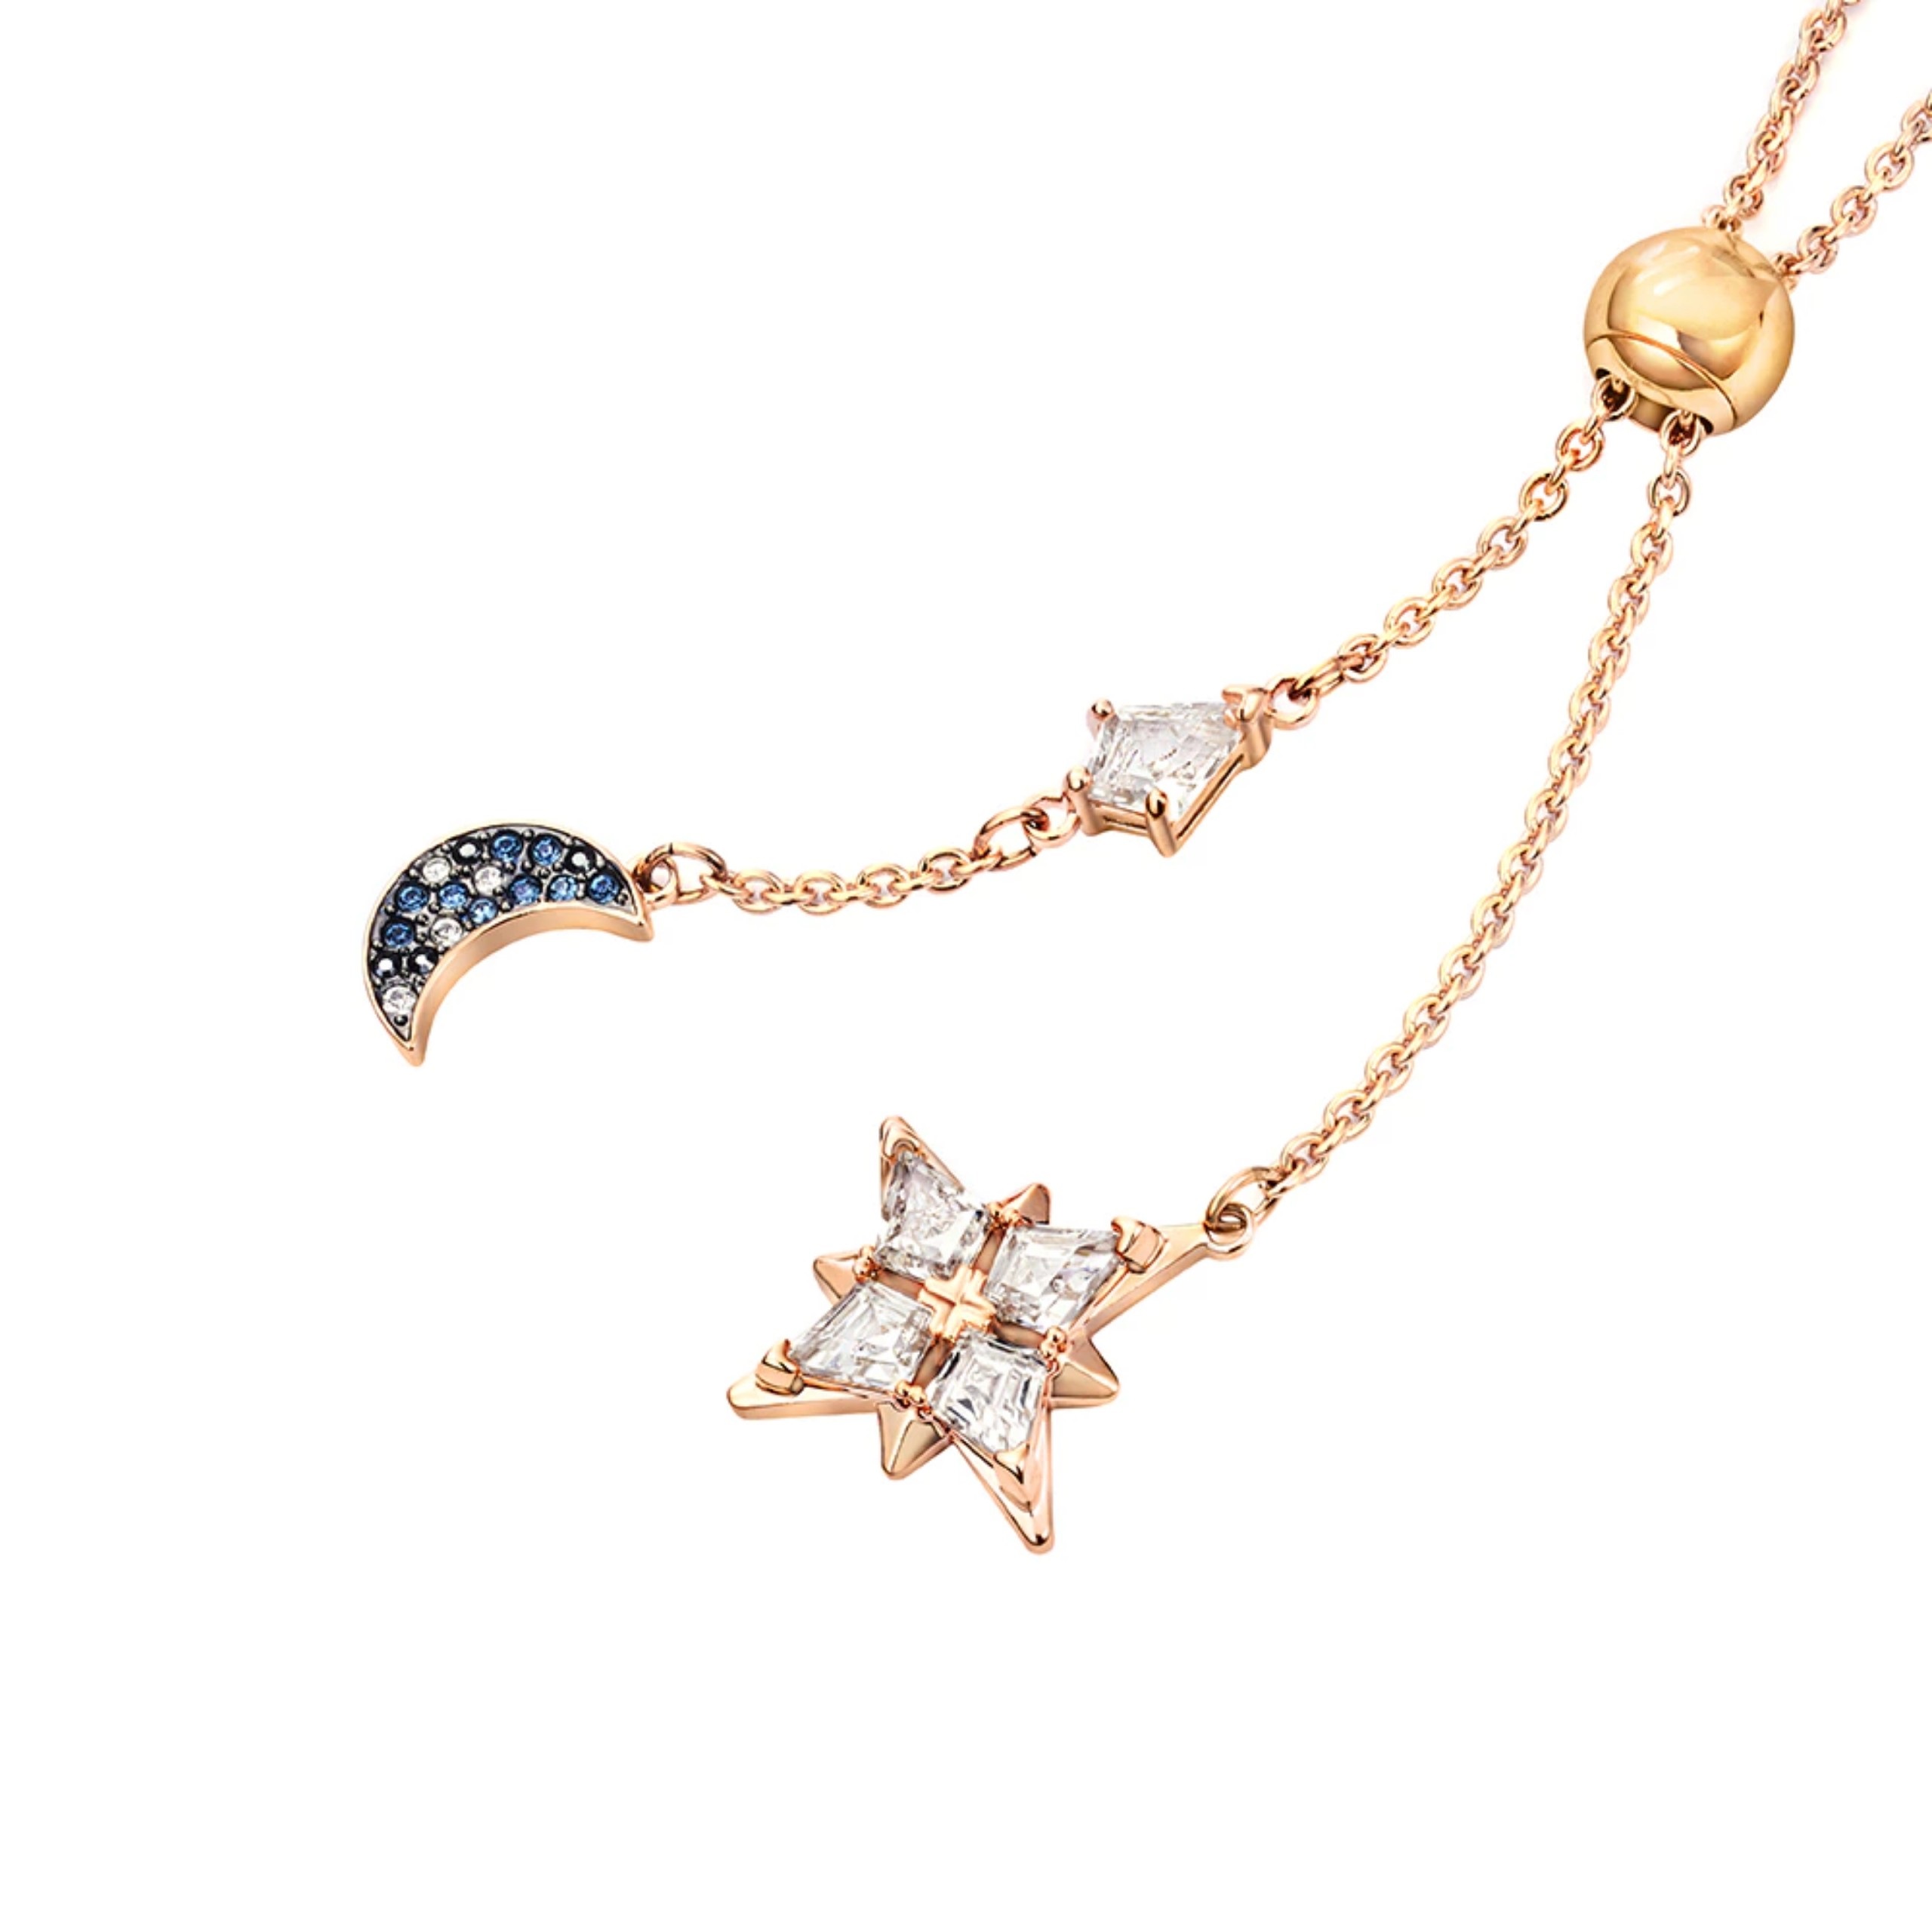 DÂY CHUYỀN SWAROVSKI SYMBOLIC Y NECKLACE MULTI-COLORED ROSE-GOLD TONE PLATED 5494357 1